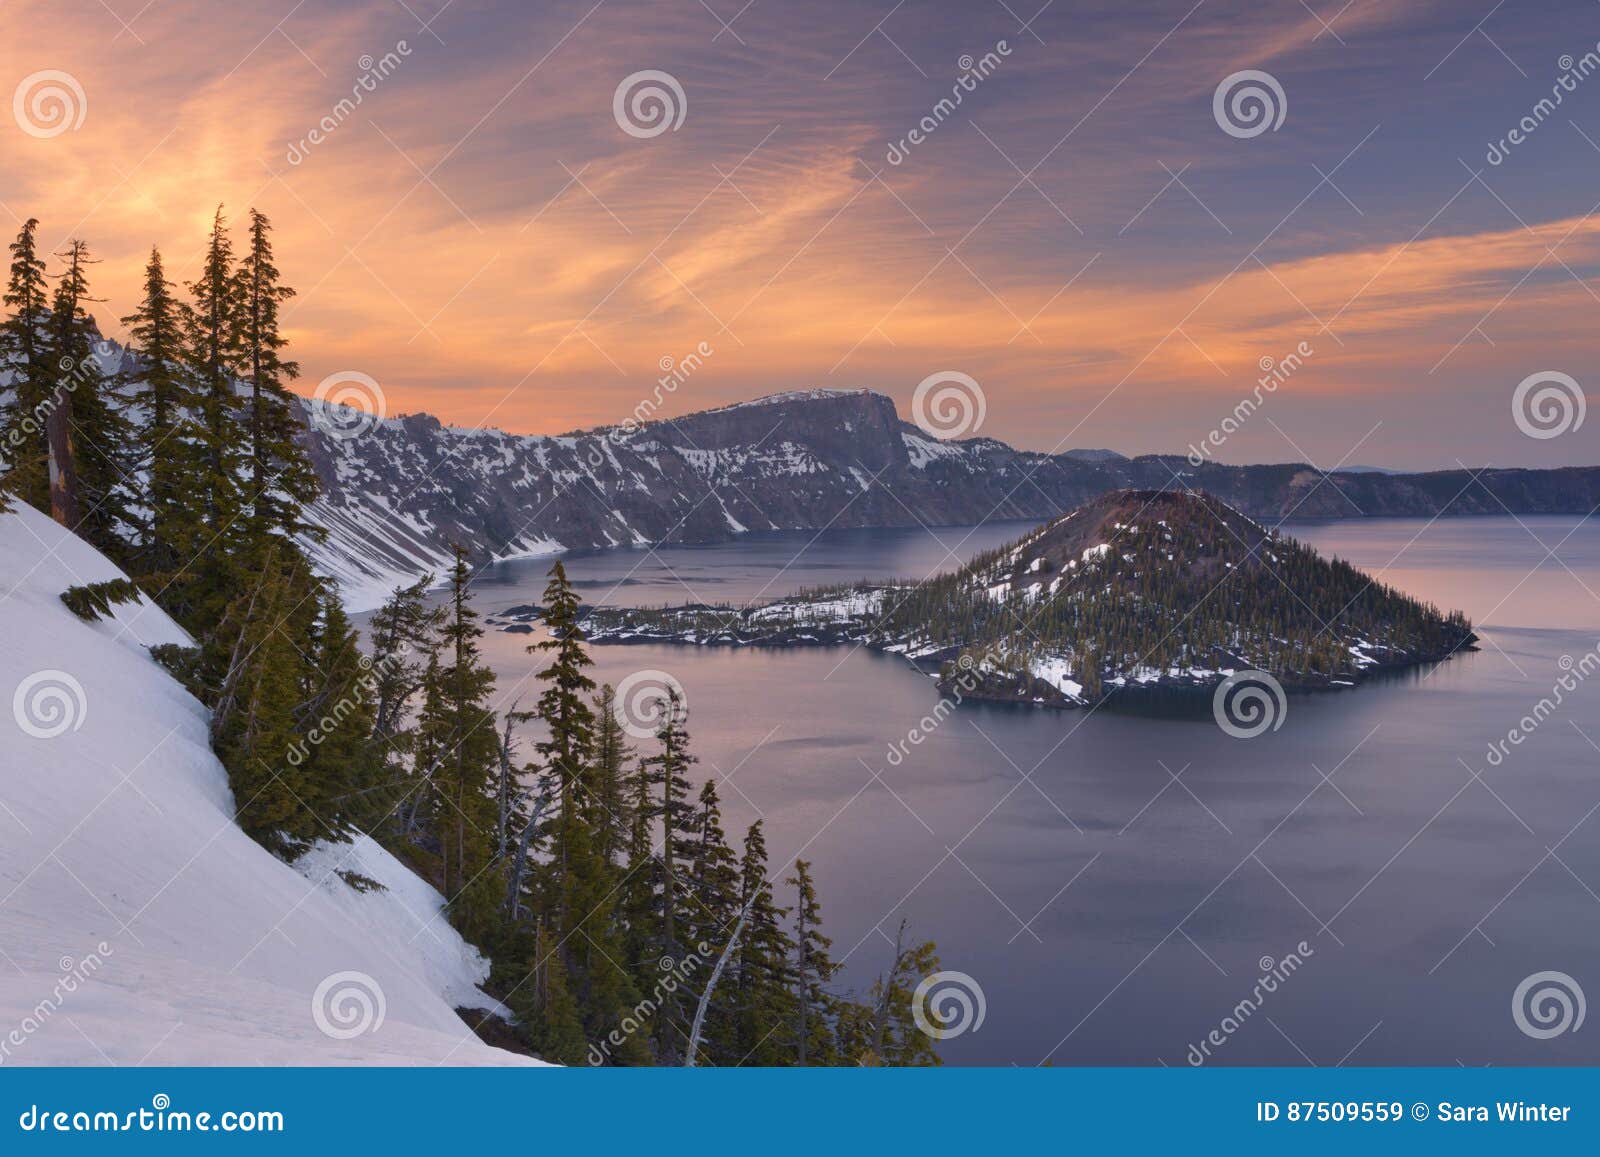 wizard island in crater lake in oregon, usa at sunset